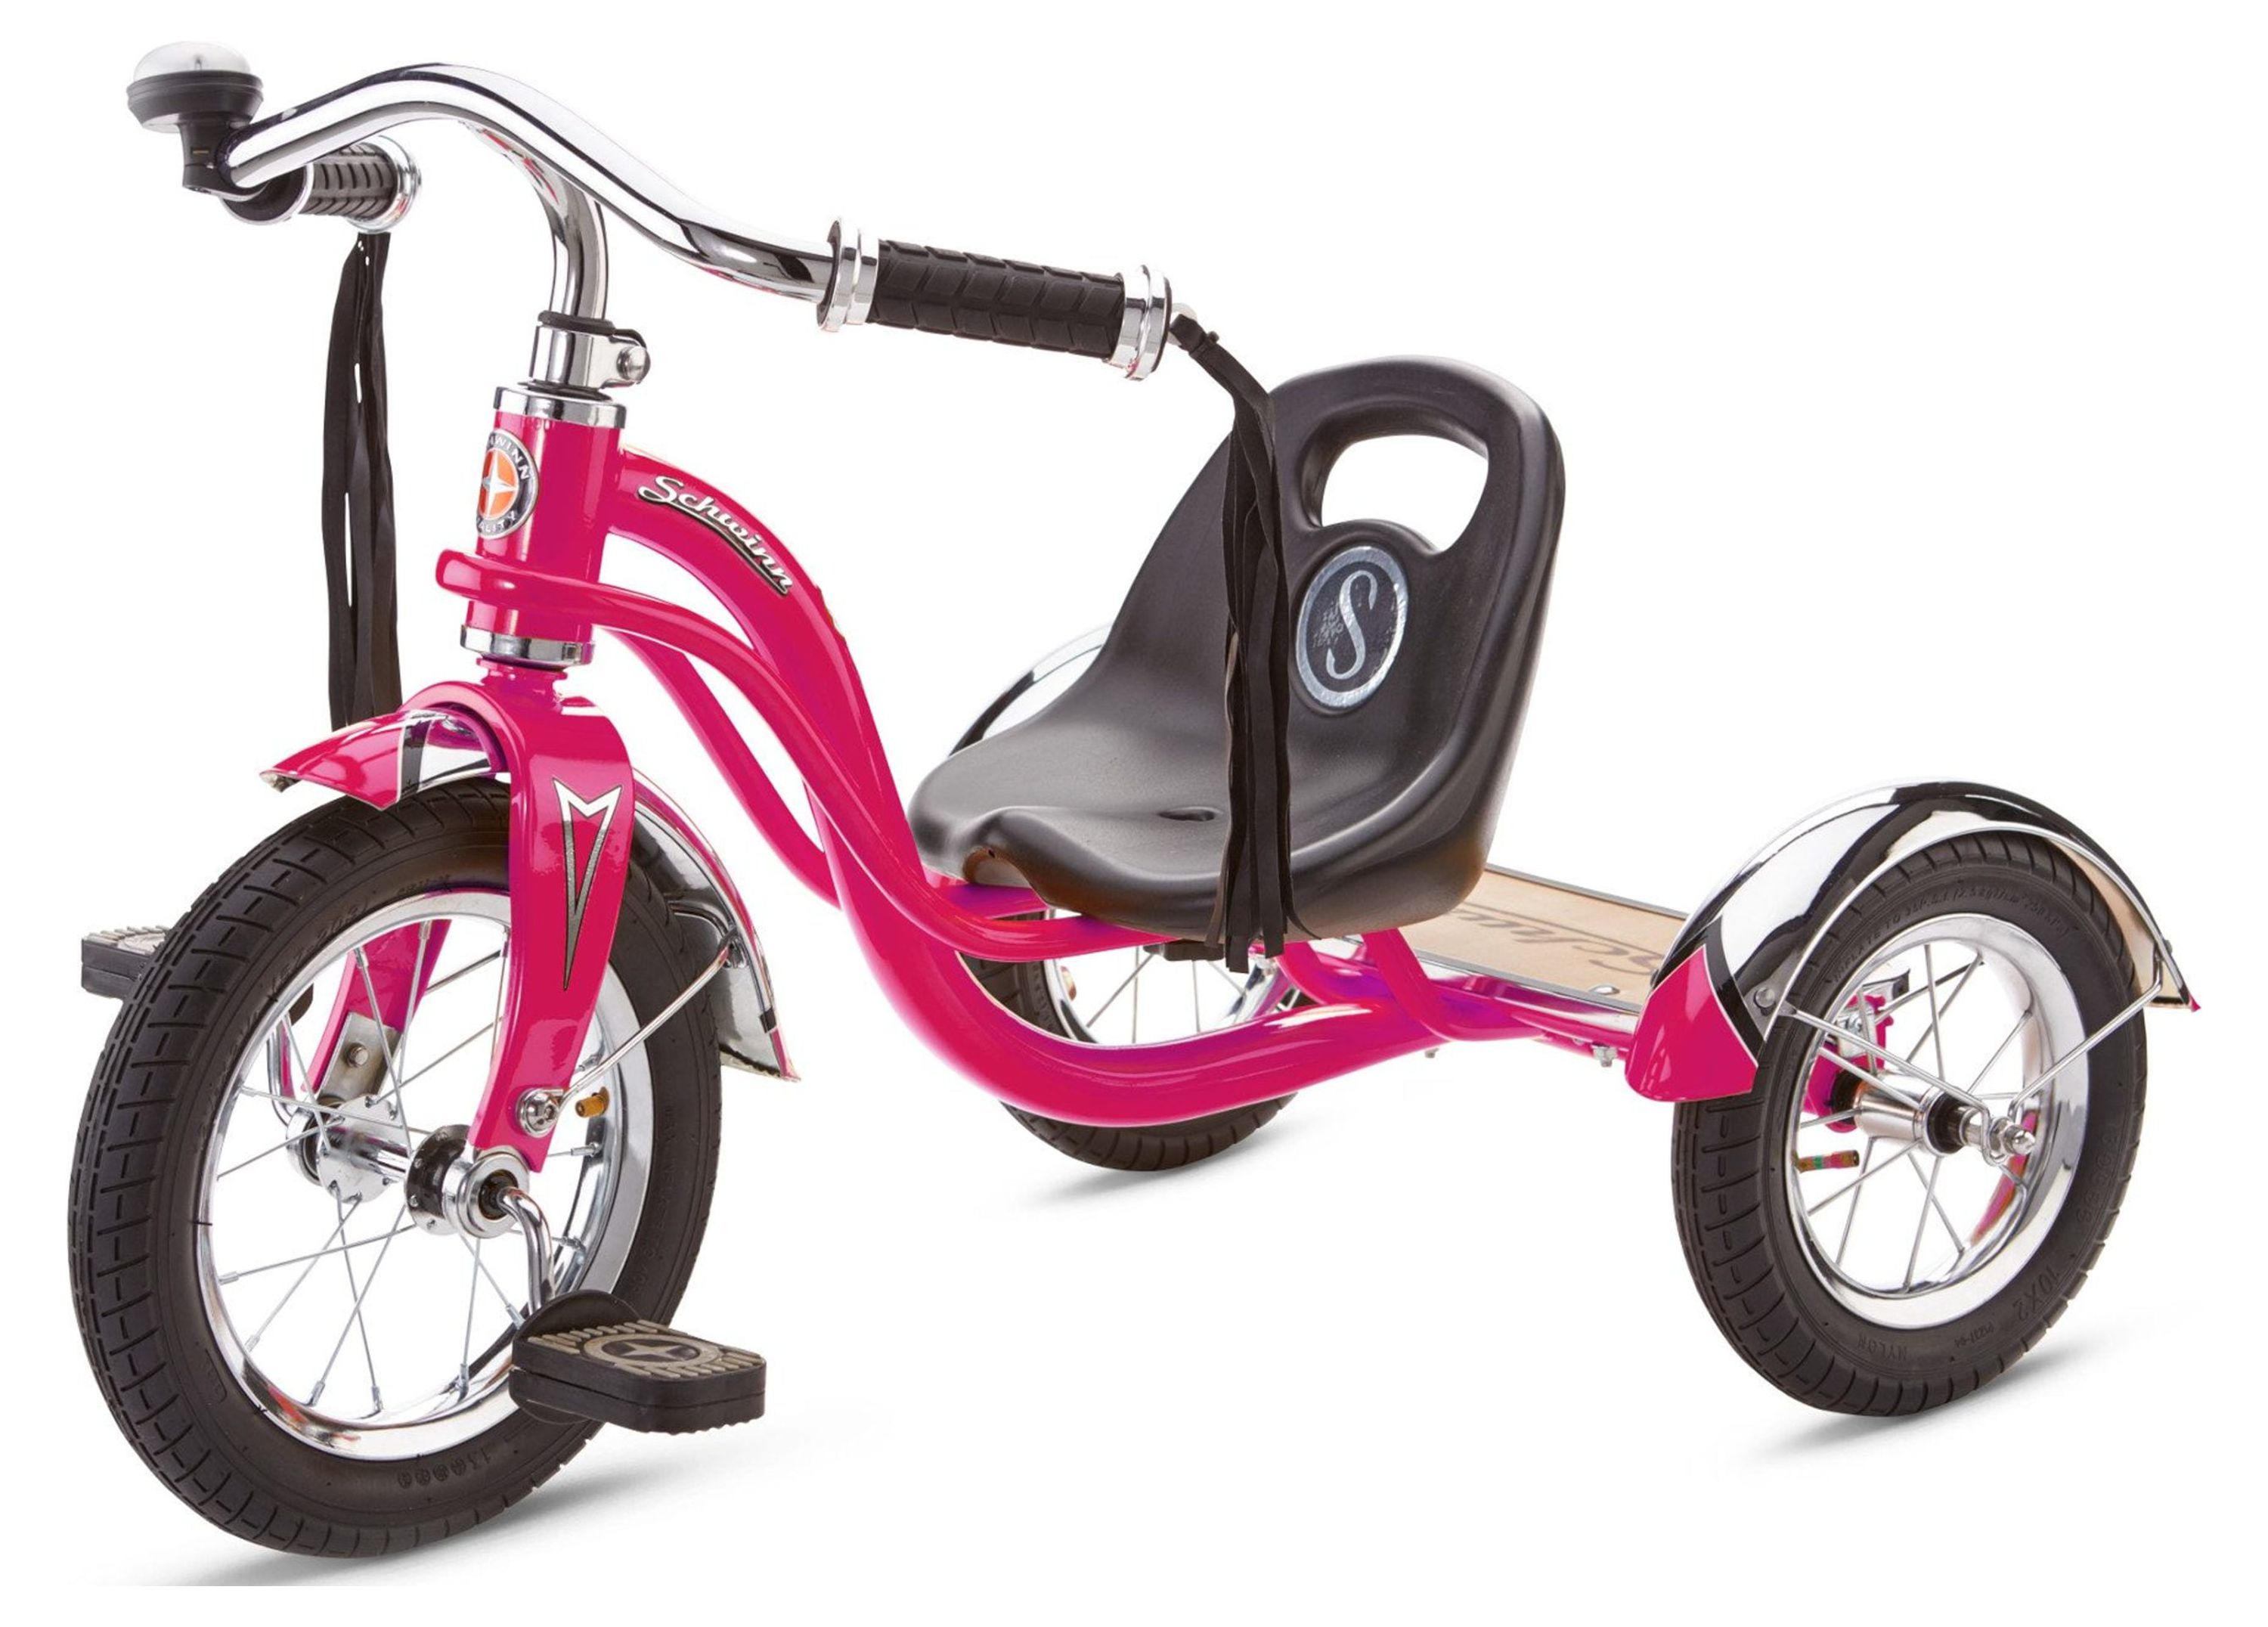 Schwinn Roadster Retro-Style Tricycle, 12-inch front wheel, ages 2 - 4, hot pink - image 3 of 7